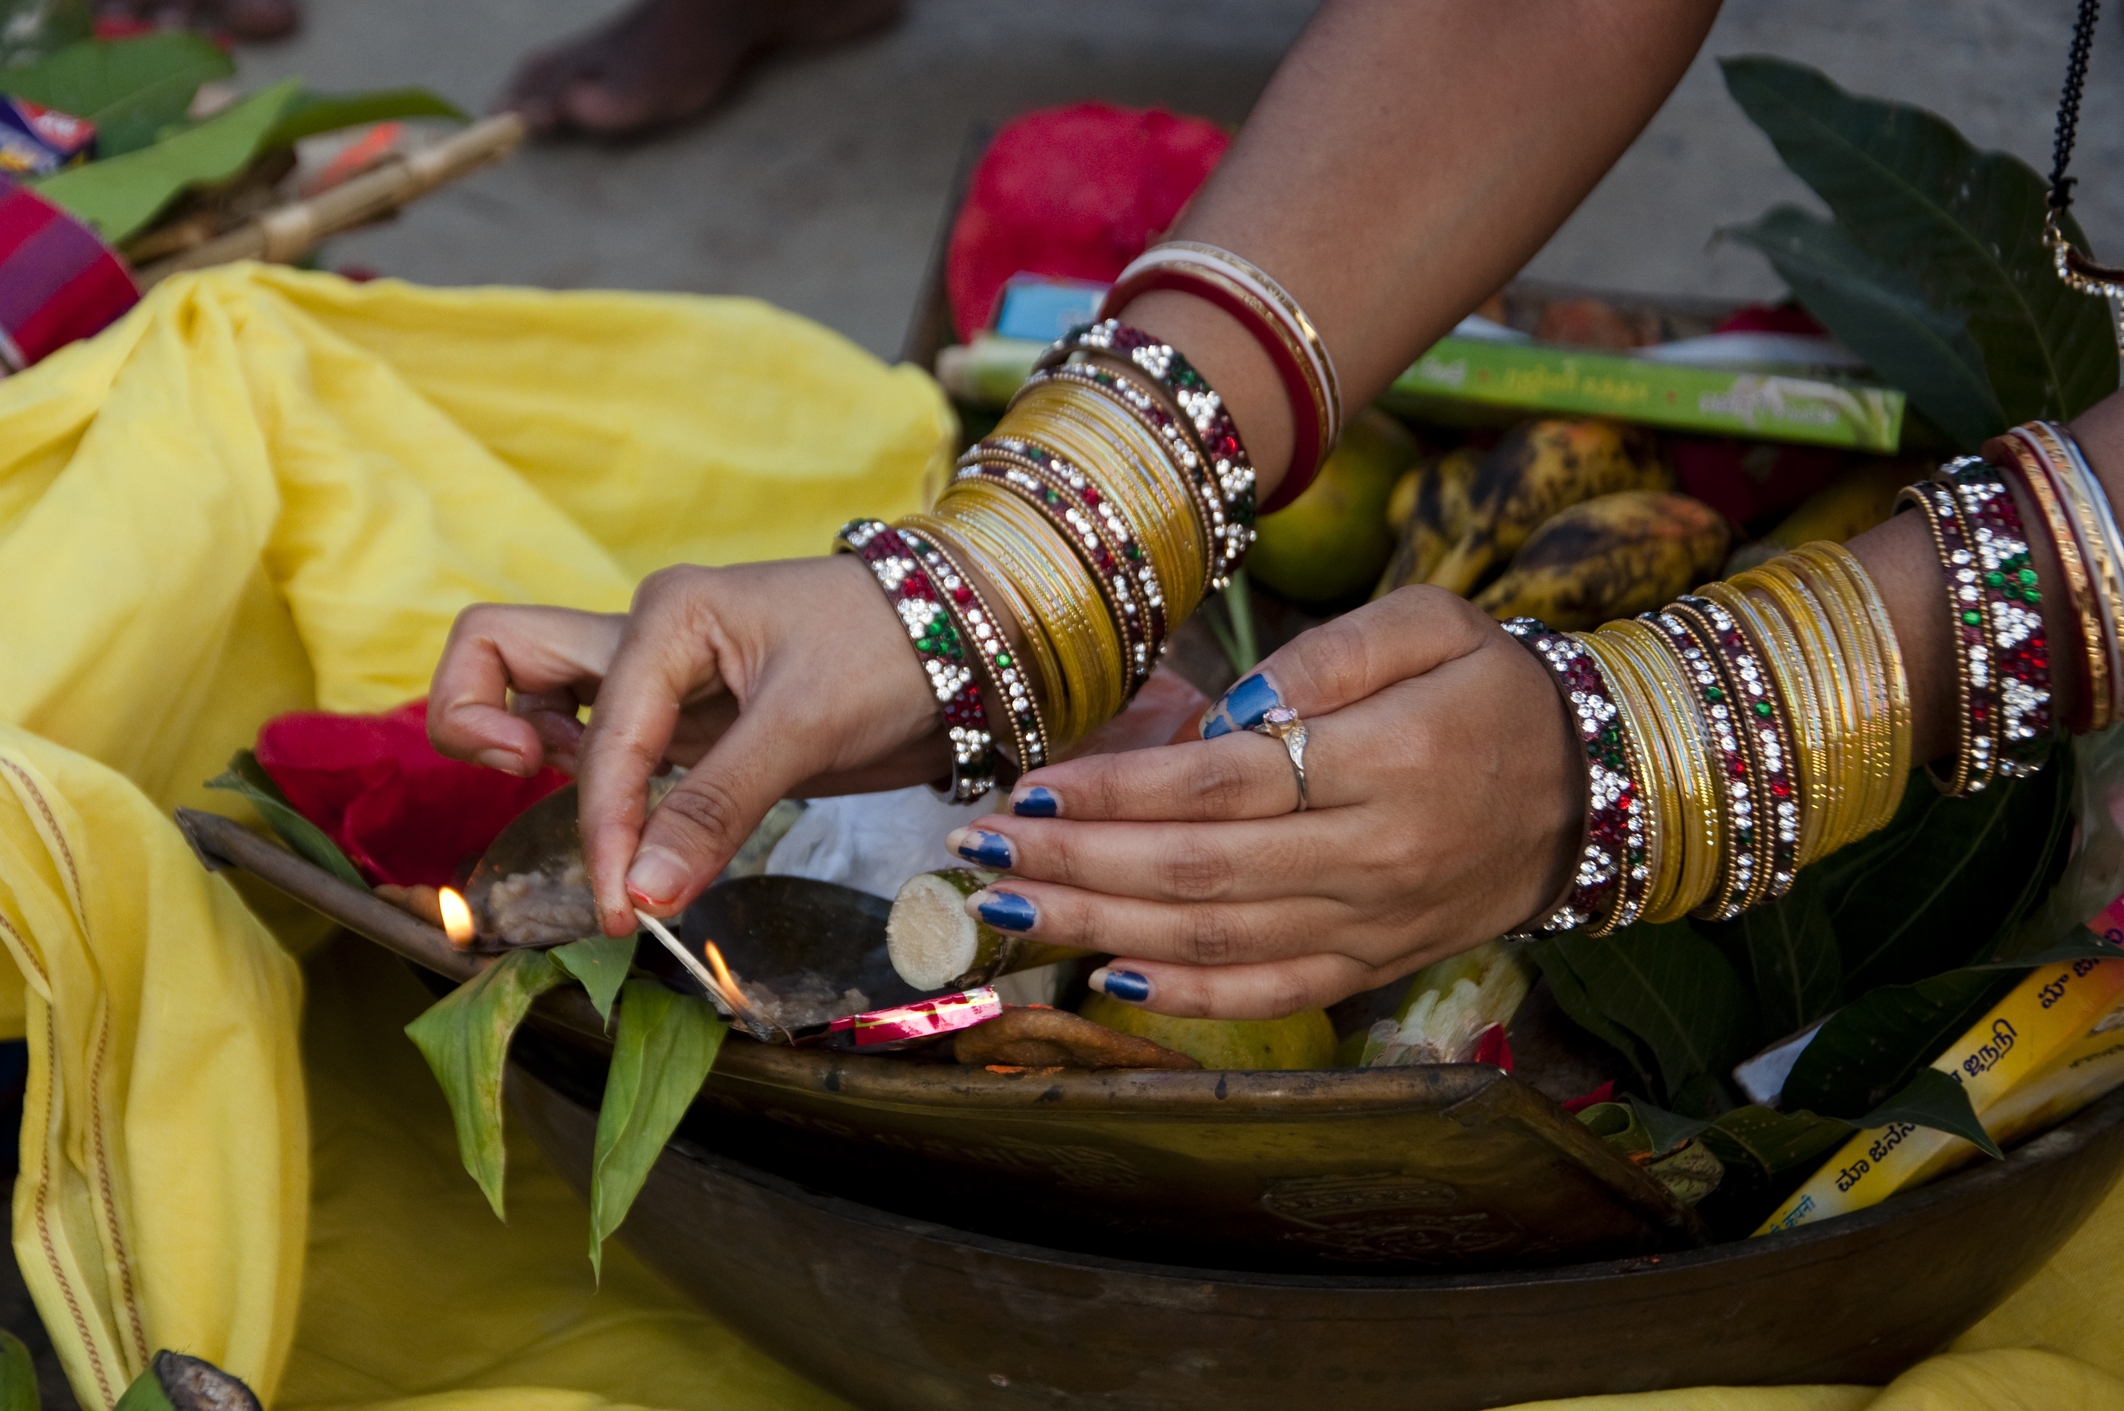 Chhath puja date timing and puja significance